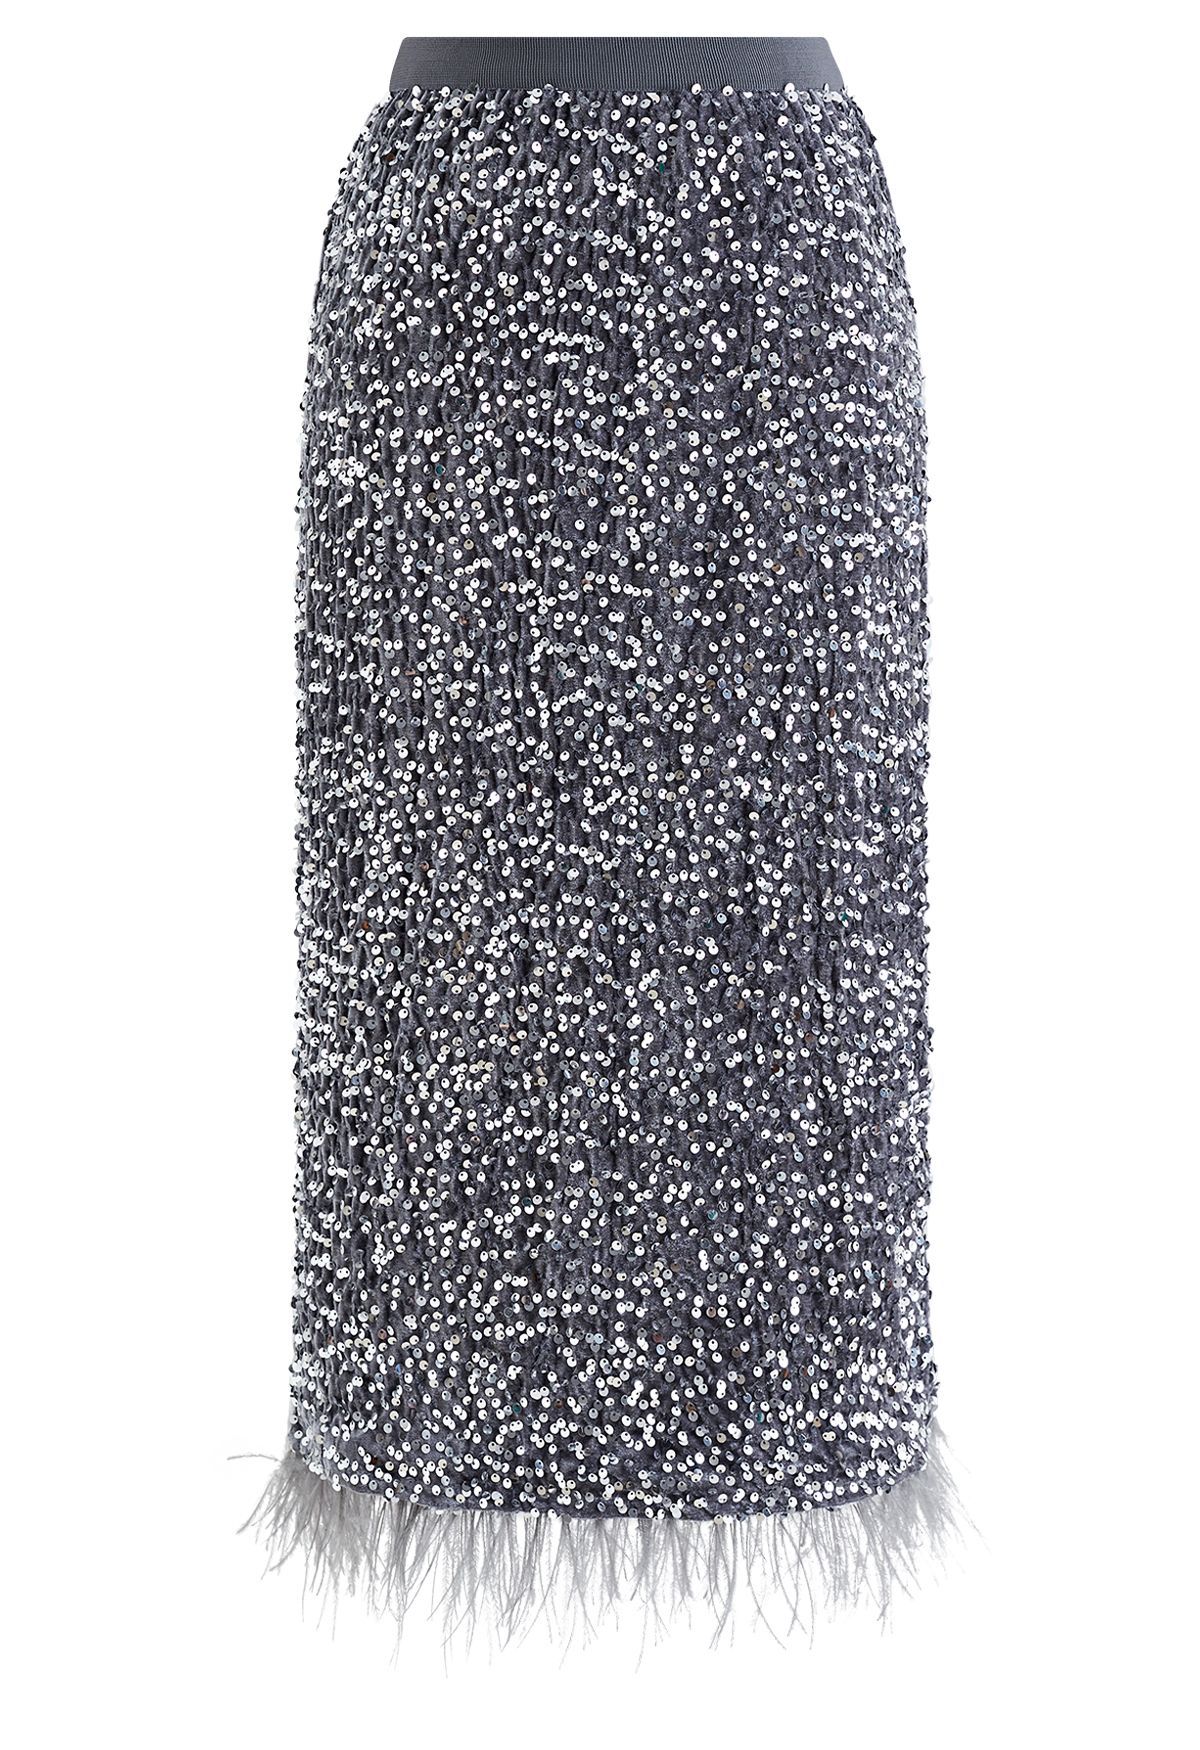 Velvet Sequined Feathered Hem Pencil Skirt in Grey | Chicwish